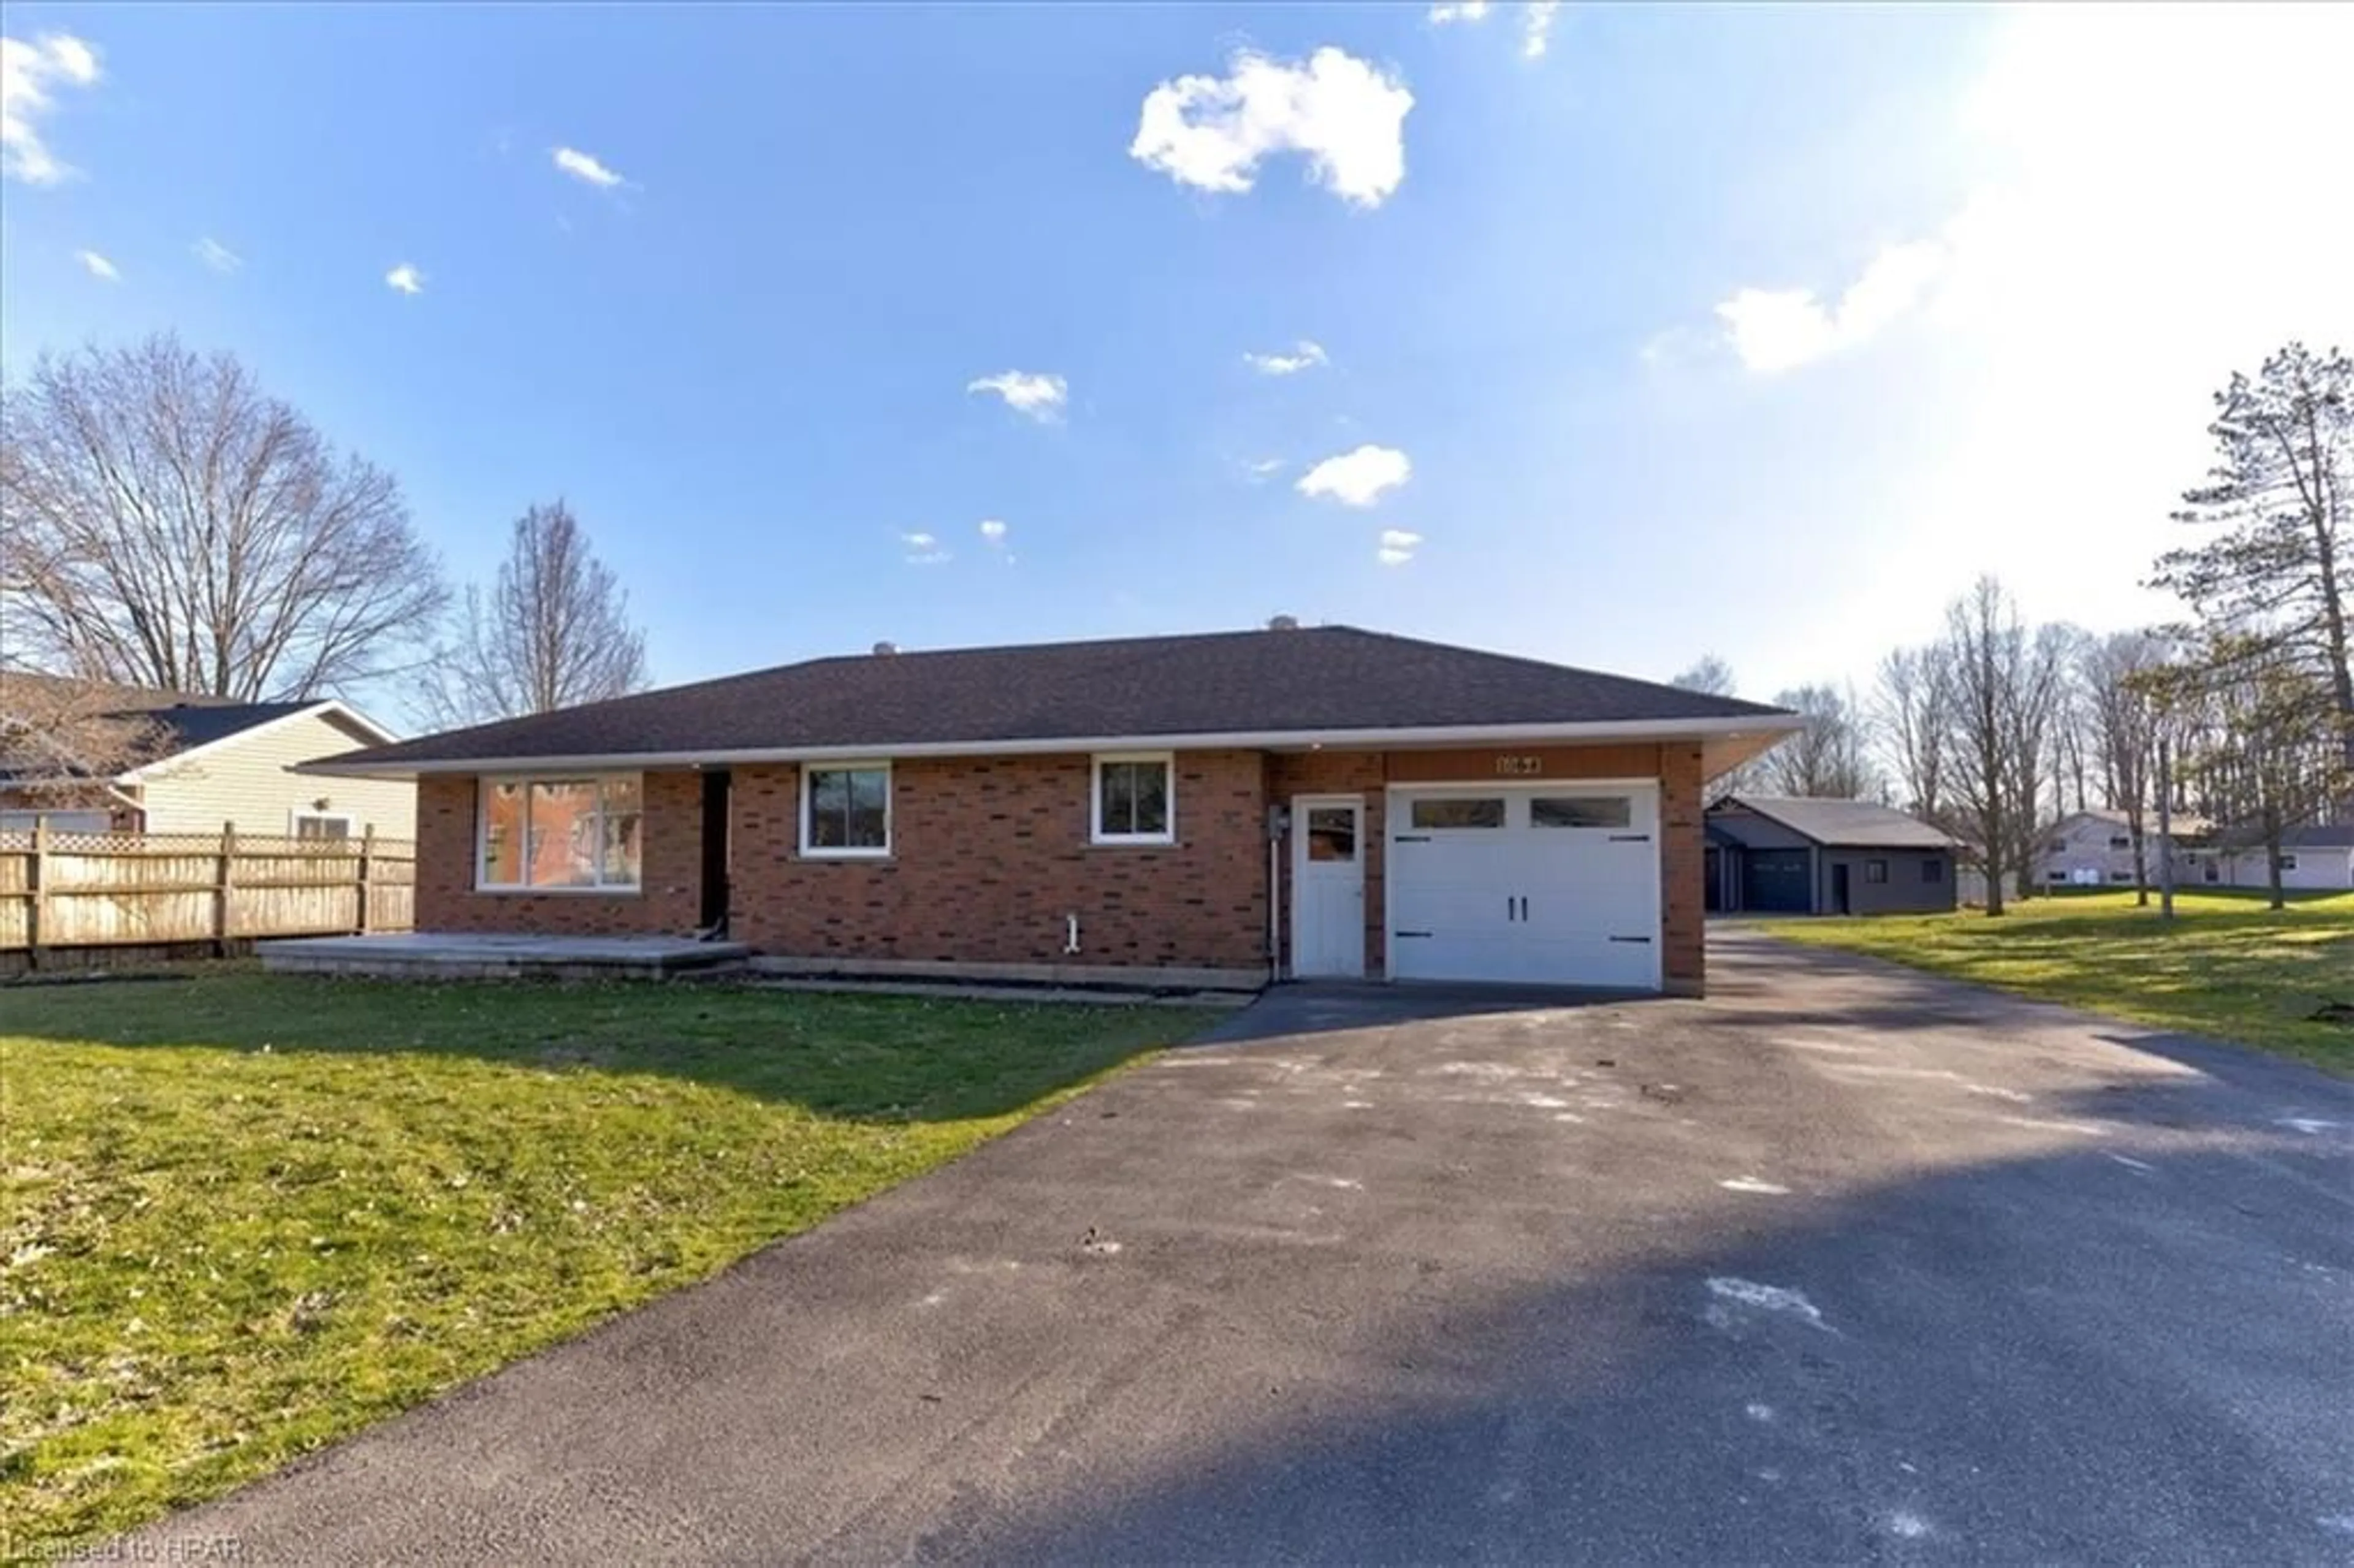 Frontside or backside of a home for 1064 Sanderson St, Wroxeter Ontario N0G 2X0